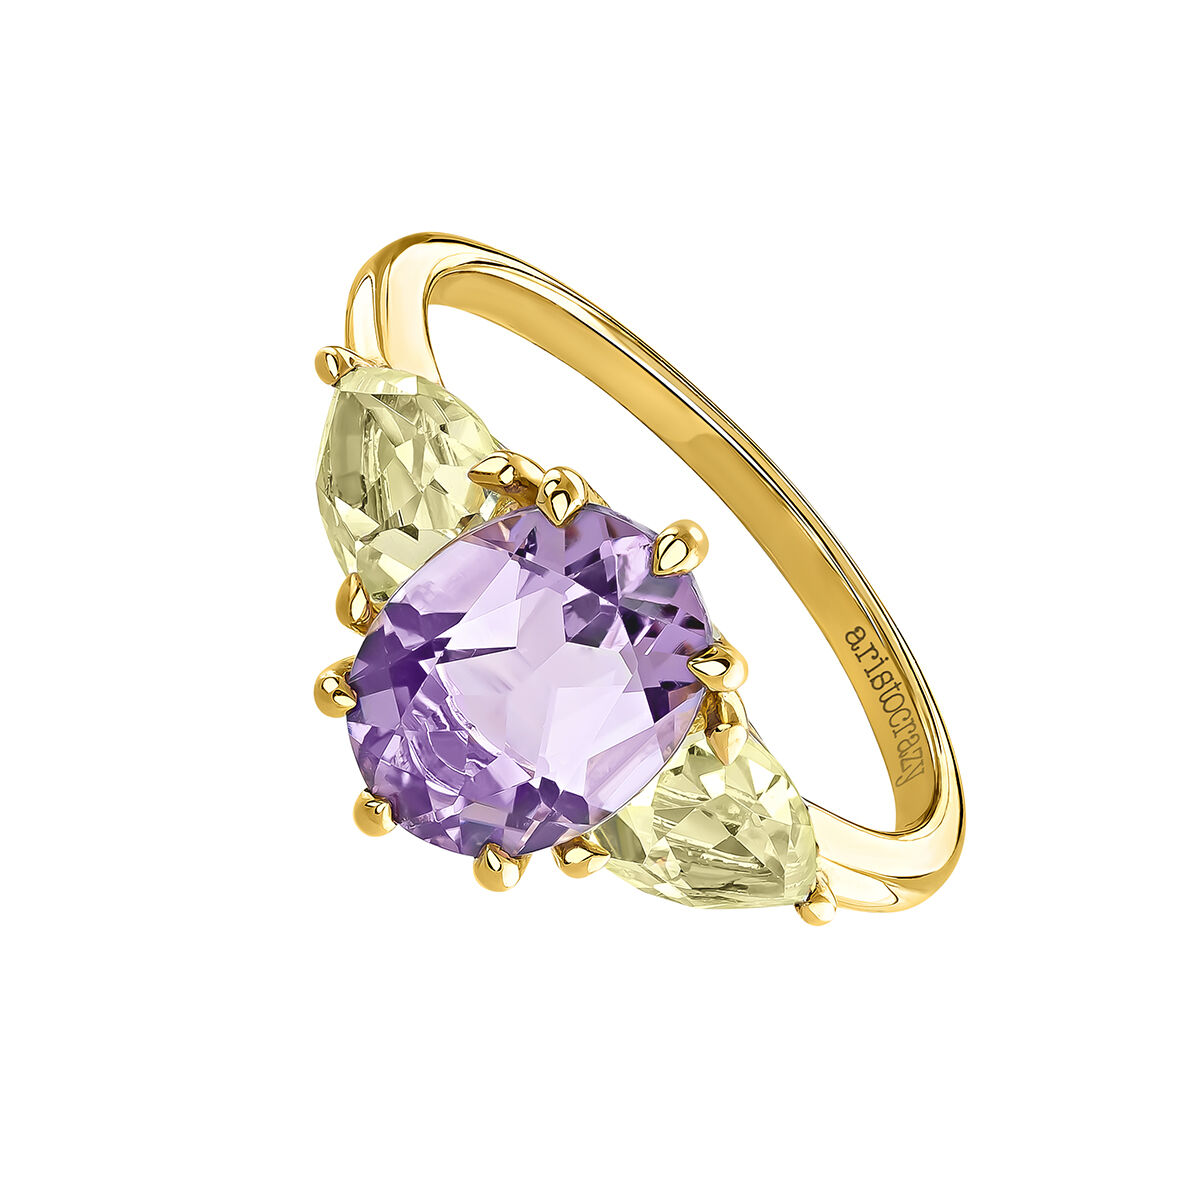 Trilogy ring in 18k yellow gold-plated sterling silver with central purple amethyst and yellow quartz stones, J03748-02-AM-LQ, hi-res